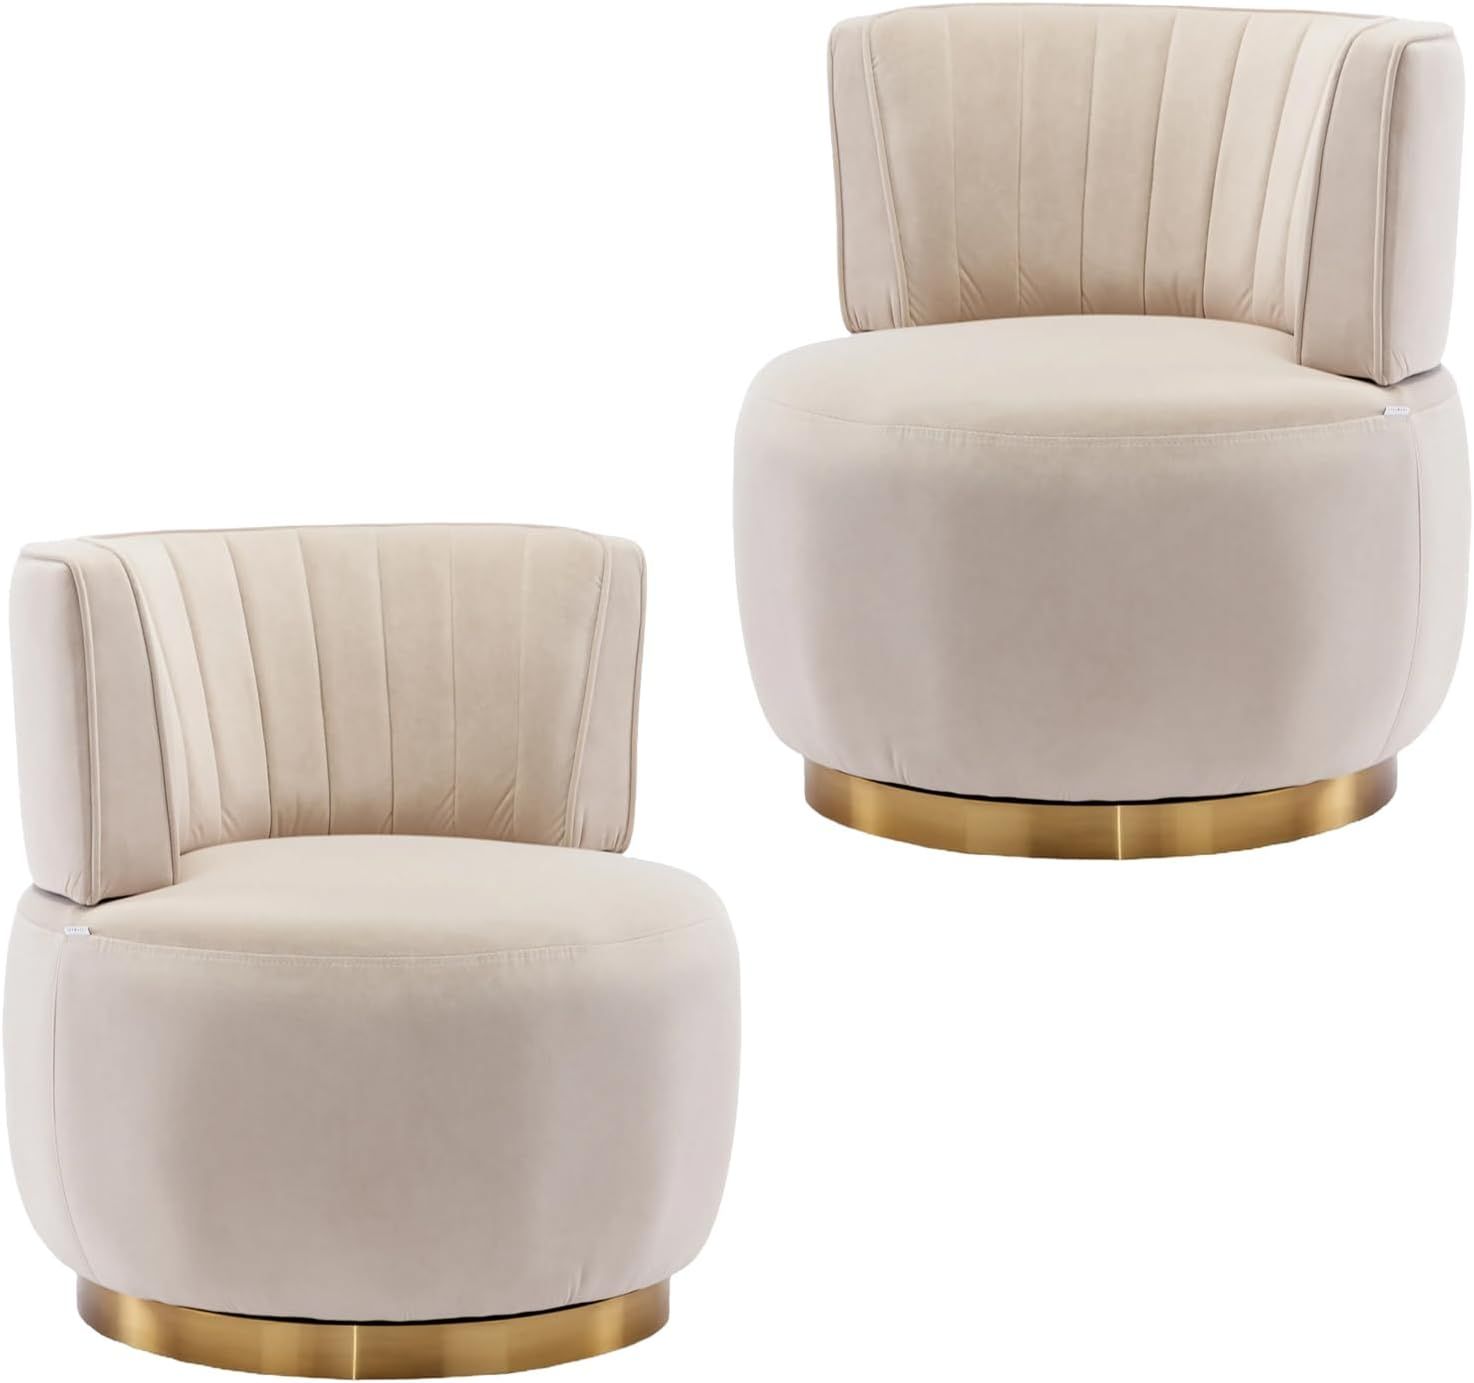 Velvet Swivel Barrel Chairs Set of 2, Upholstered 360-Degree Swivel Accent Armchair, Modern Comfy Round Leisure Sofa Chair for Small Living Room, Bedroom, Nursery Room, Lounge, Office, Beige | Amazon (US)